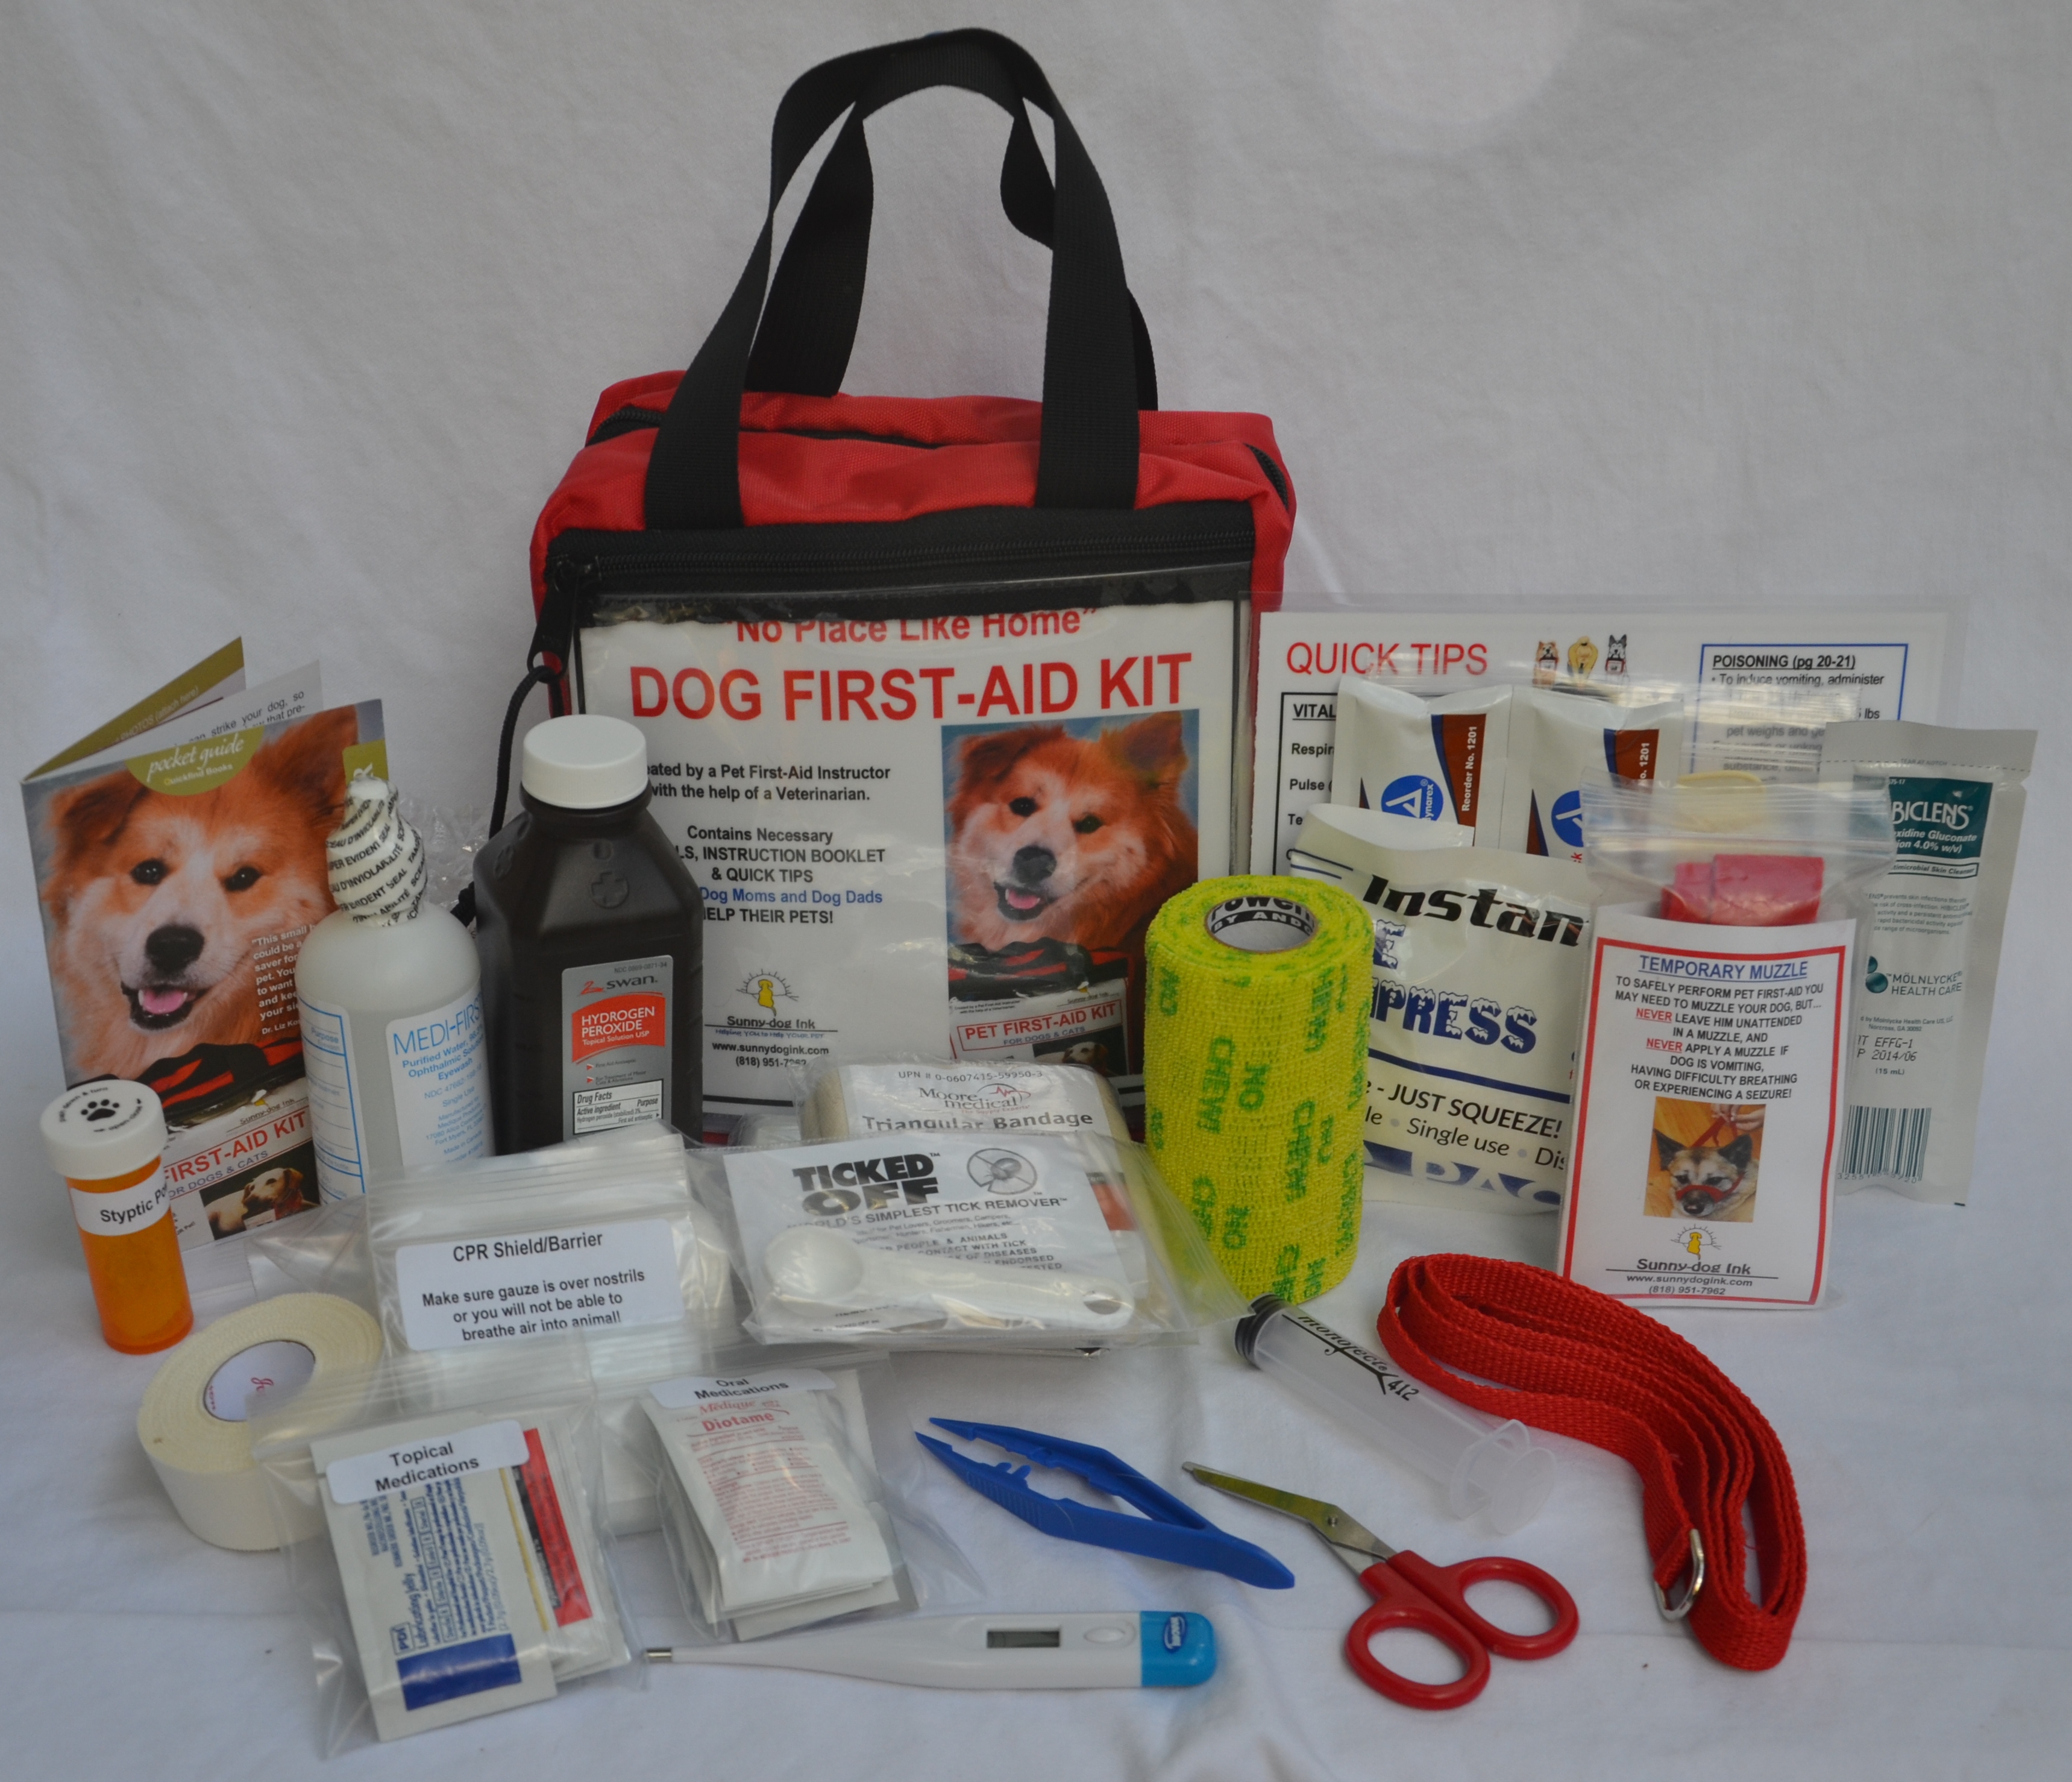 Don't forget to have a first aid kit handy!  Image source: sunnydogink.com